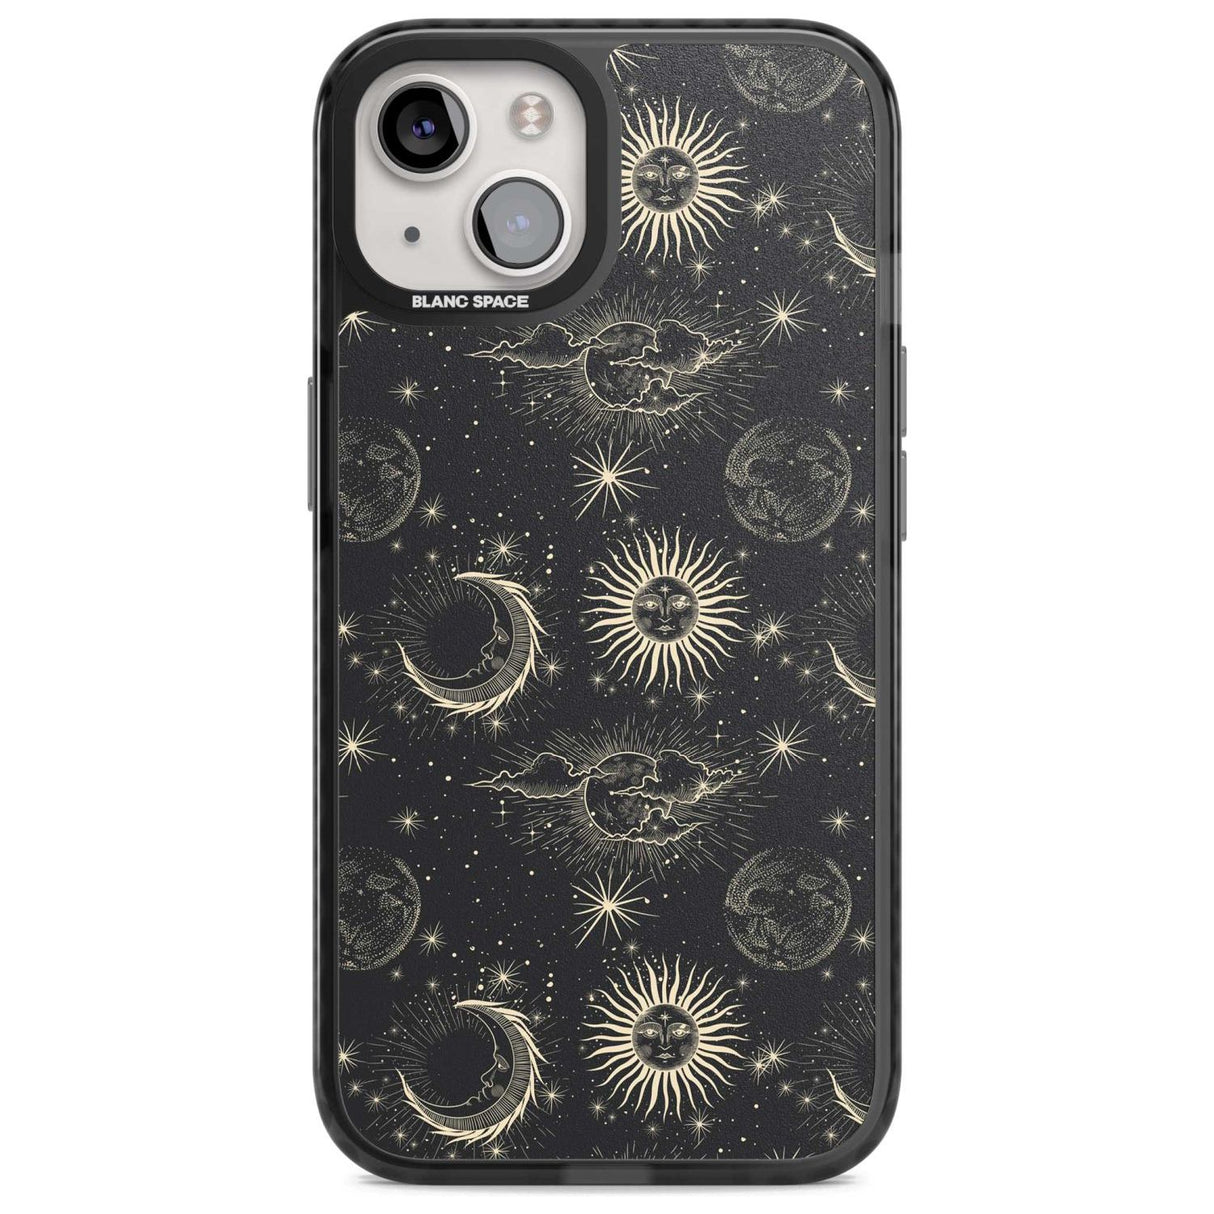 Large Suns, Moons & Clouds Astrological Phone Case iPhone 15 Plus / Magsafe Black Impact Case,iPhone 15 / Magsafe Black Impact Case,iPhone 14 Plus / Magsafe Black Impact Case,iPhone 14 / Magsafe Black Impact Case,iPhone 13 / Magsafe Black Impact Case Blanc Space